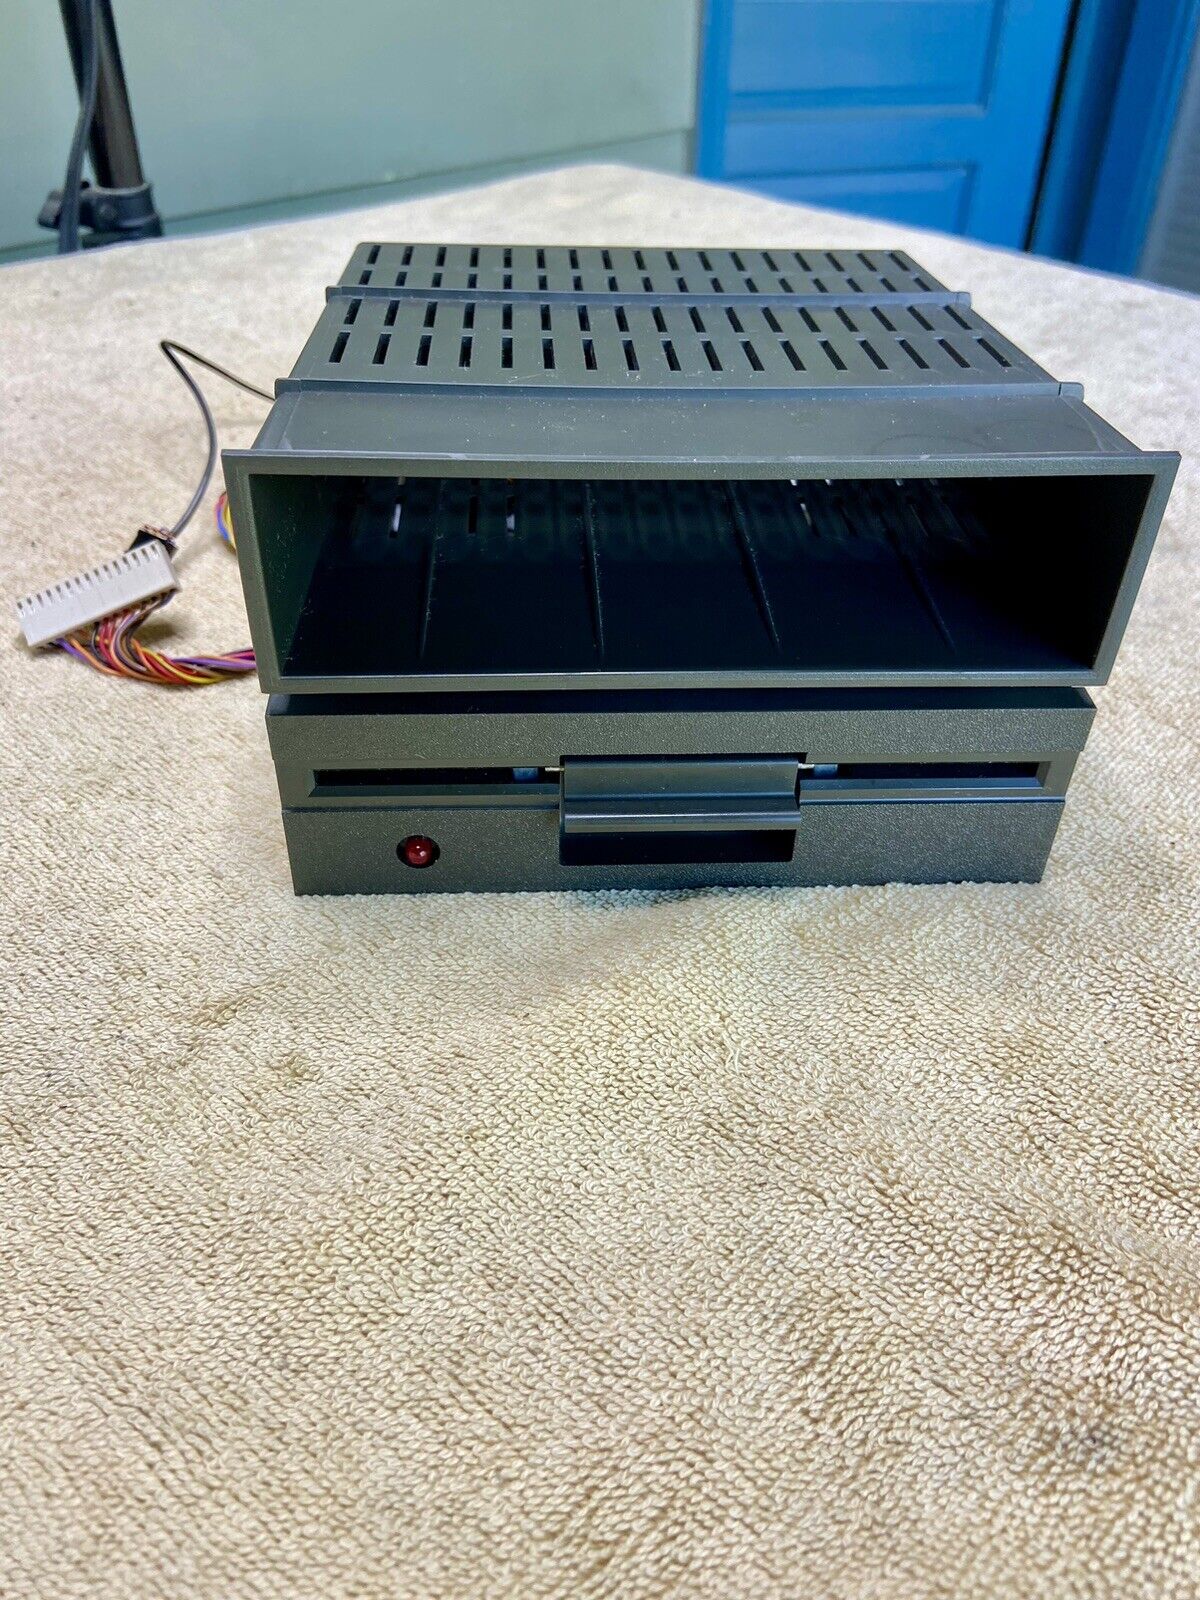 Commodore SX-64 Floppy Disk Drive With Upper Drive Bay  SX64 C-64